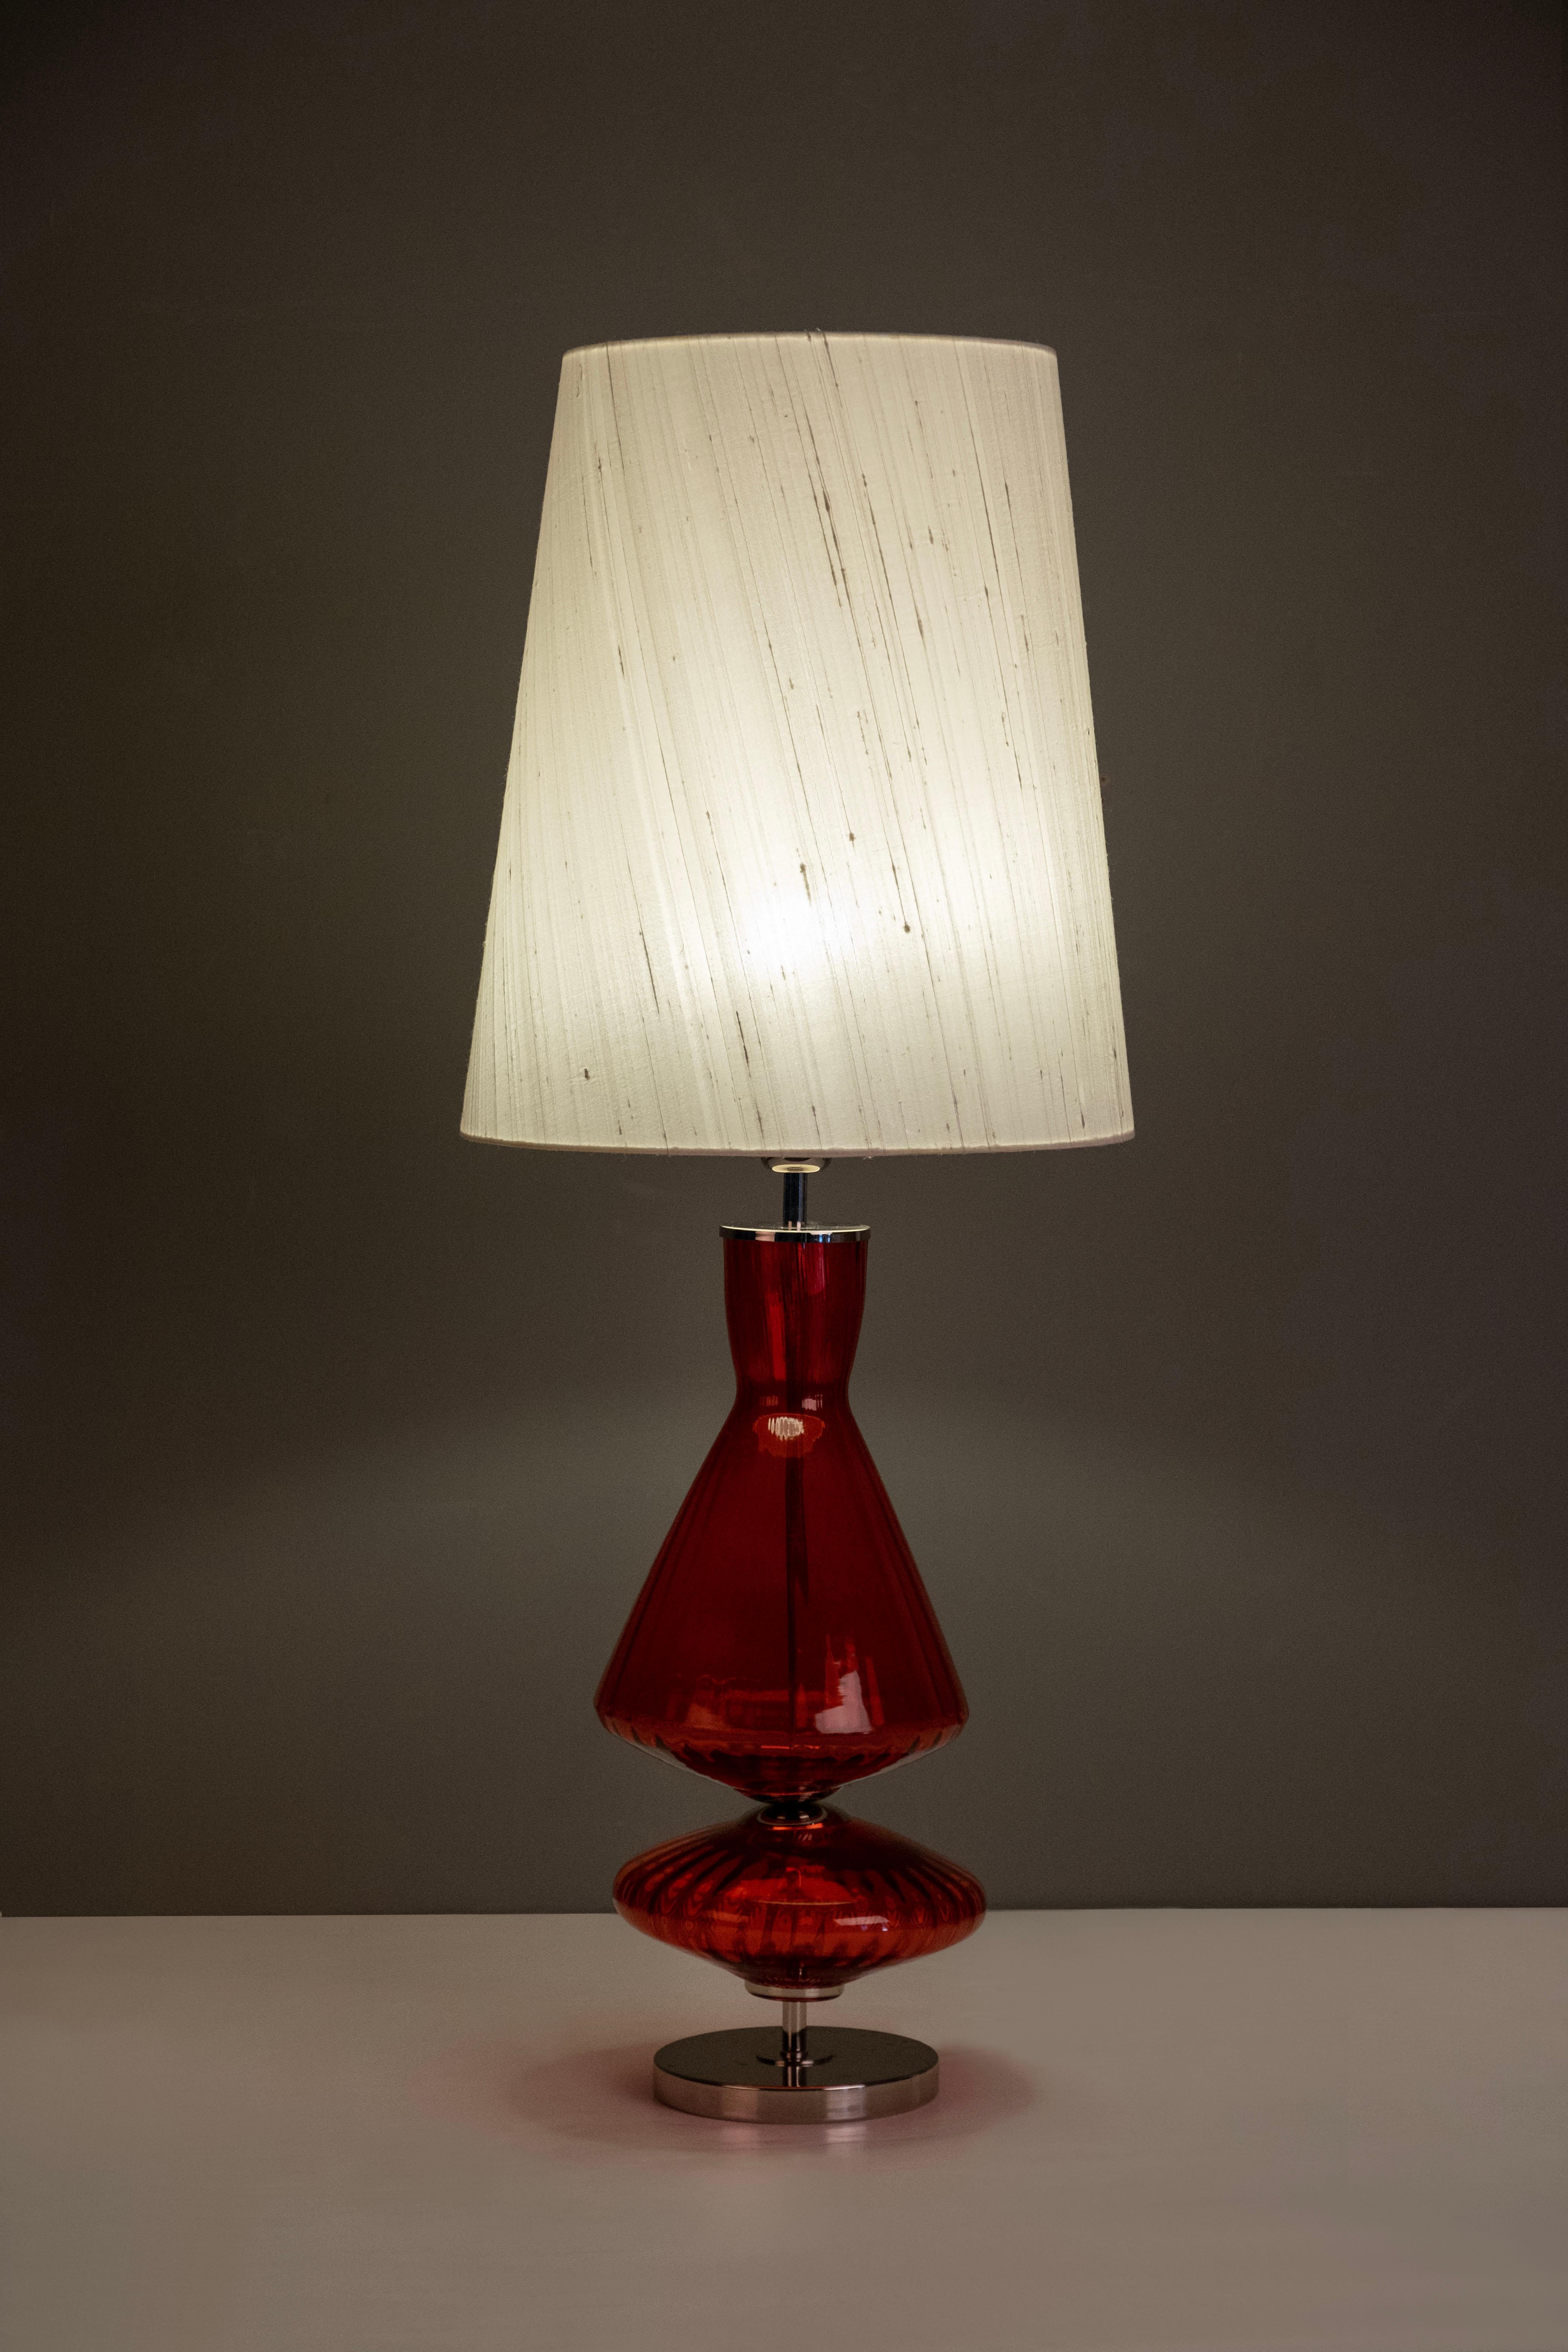 Set/2 Modern Table Lamps, Glass Base, Silk Lampshade, Handcrafted in Portugal - Europe by GF Modern.

This is an elegant table lamp and an attractive addition to a modern home. The red glass and polished stainless steel gracefully combine with the